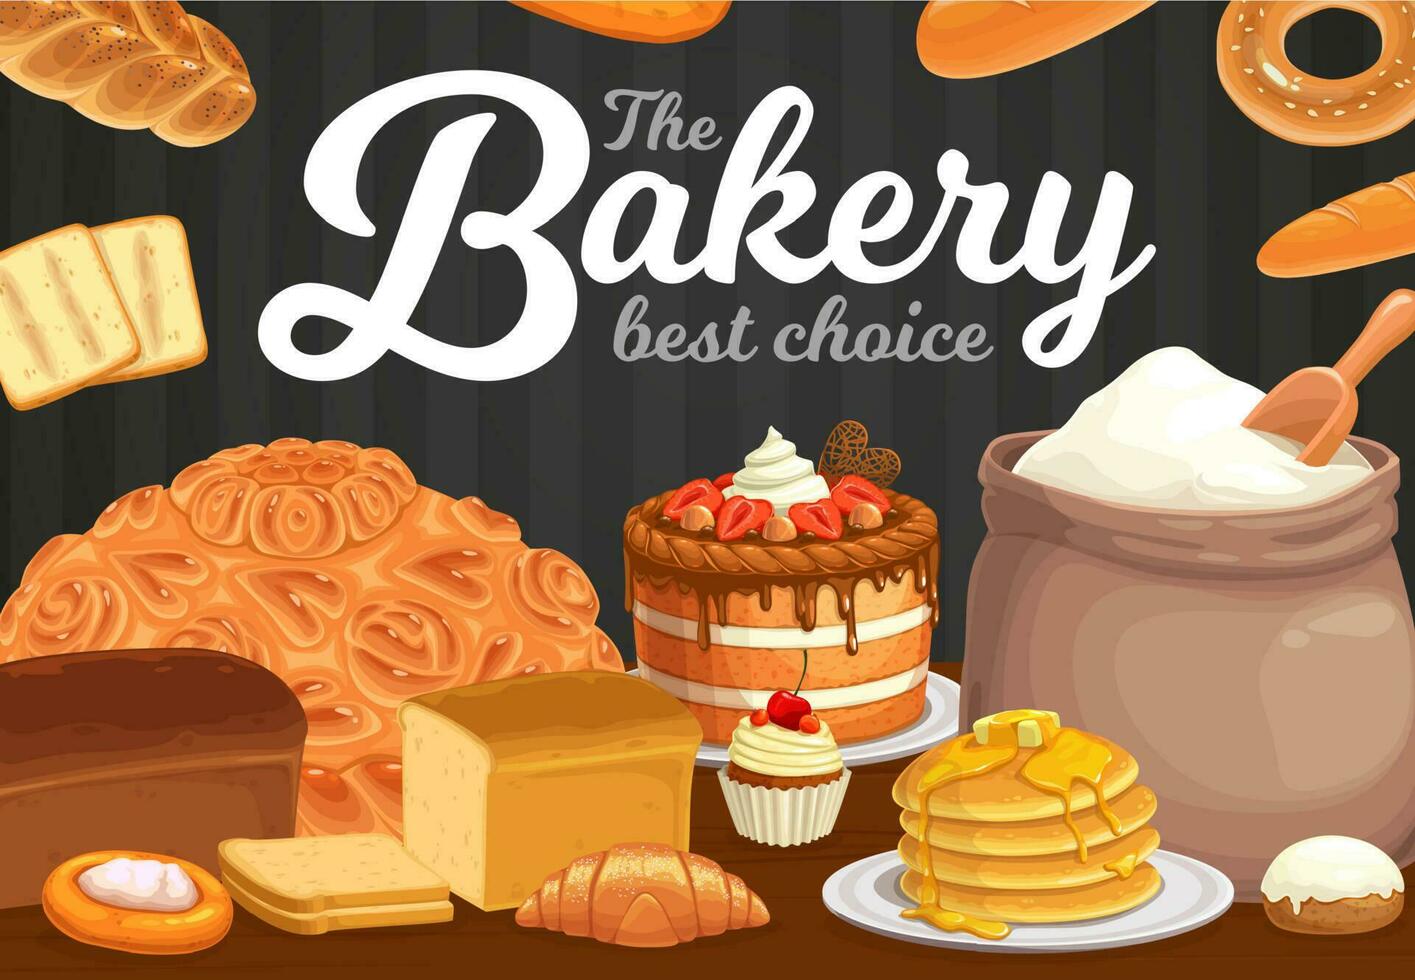 Bakery, bread pastry desserts cafe vector poster